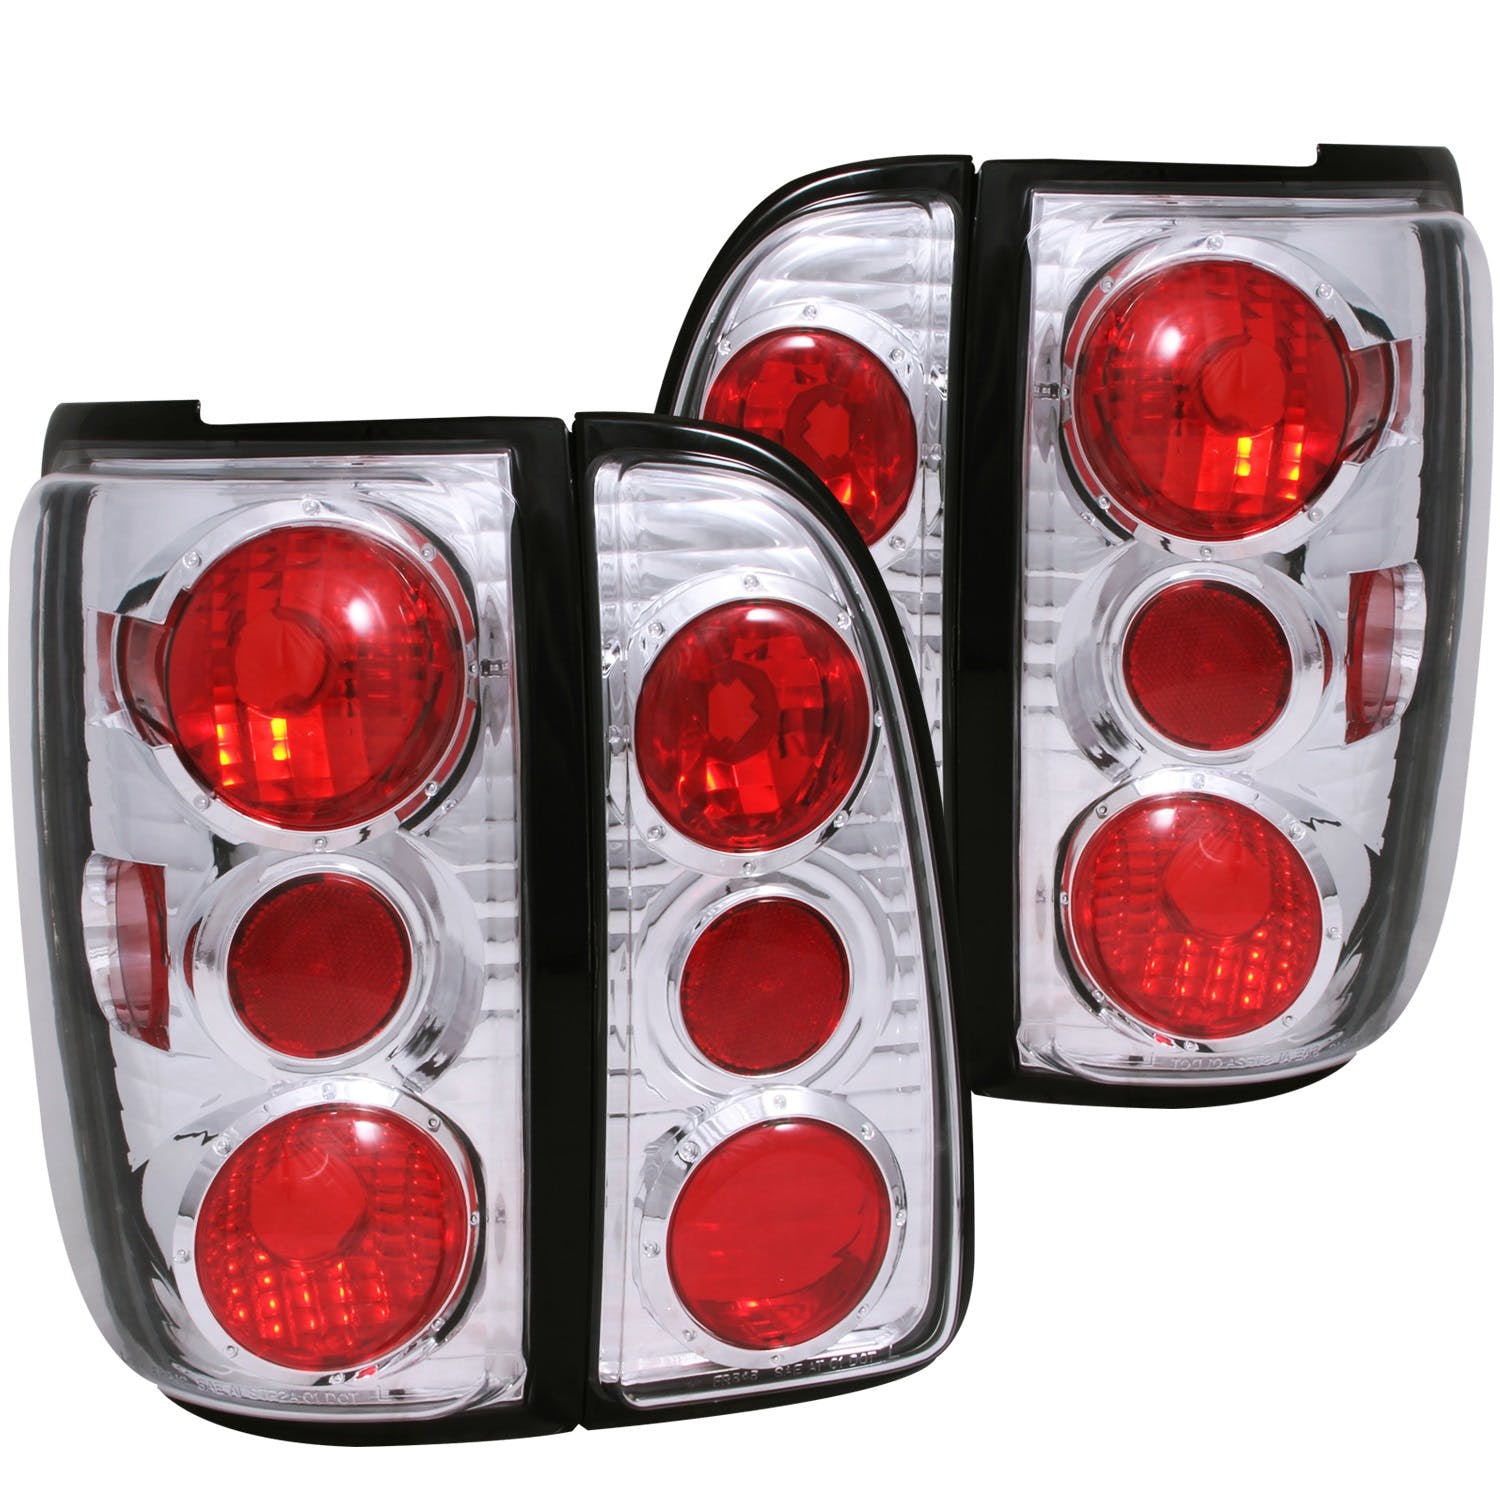 AnzoUSA 211109 Taillights Chrome